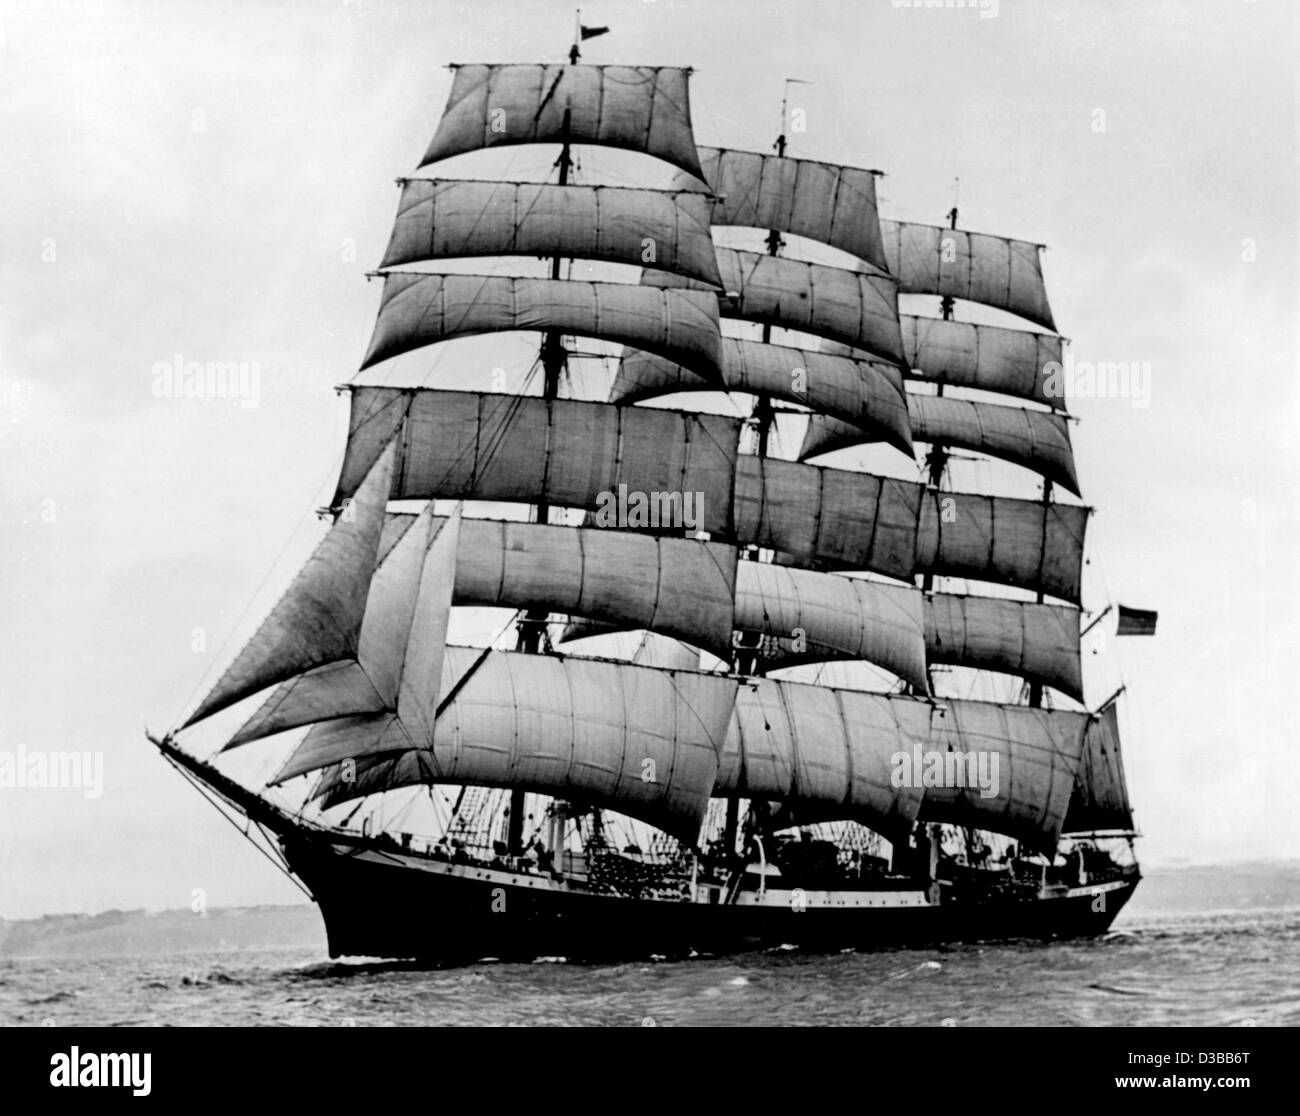 (dpa files) - An undated filer shows the four masted sailing boat 'Pamir' in Hamburg. 80 of the 86 seamen perished when the sailing ship used for training sank 21 September 1957 in a hurricane 600 nautical miles southwest of the Azores. Stock Photo